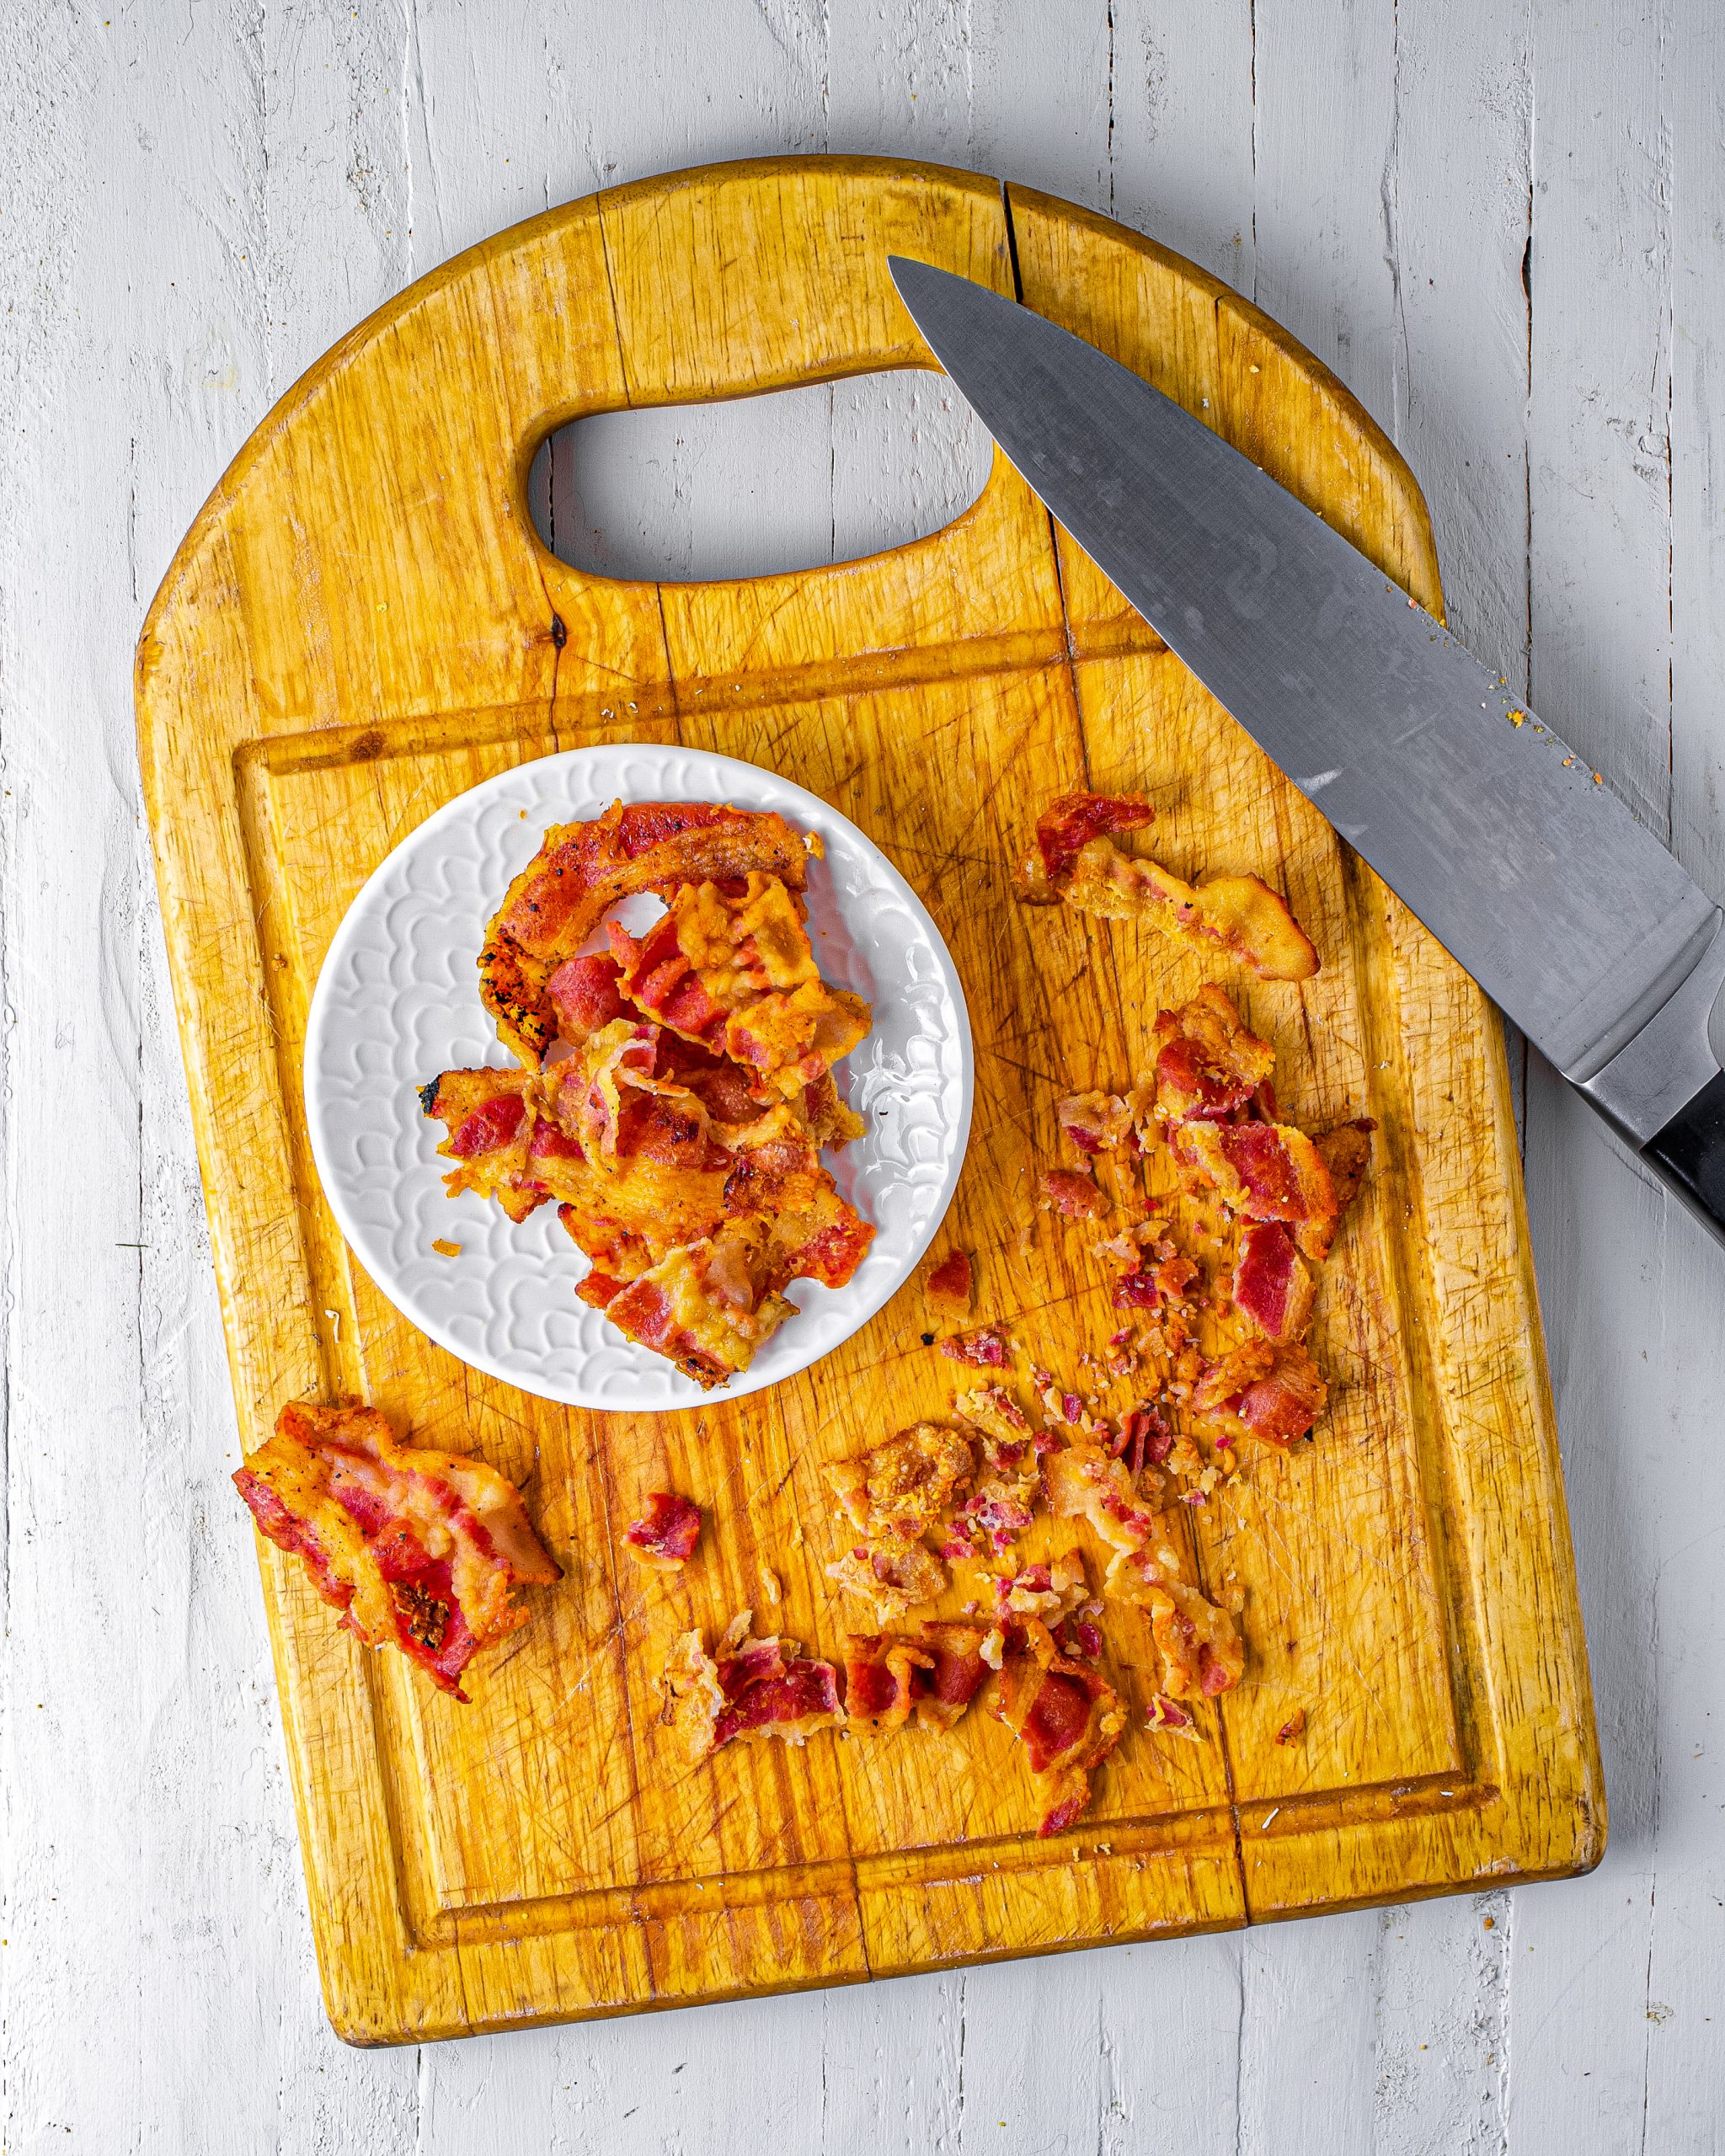 Fry the bacon until crispy, then crumble and set aside. 